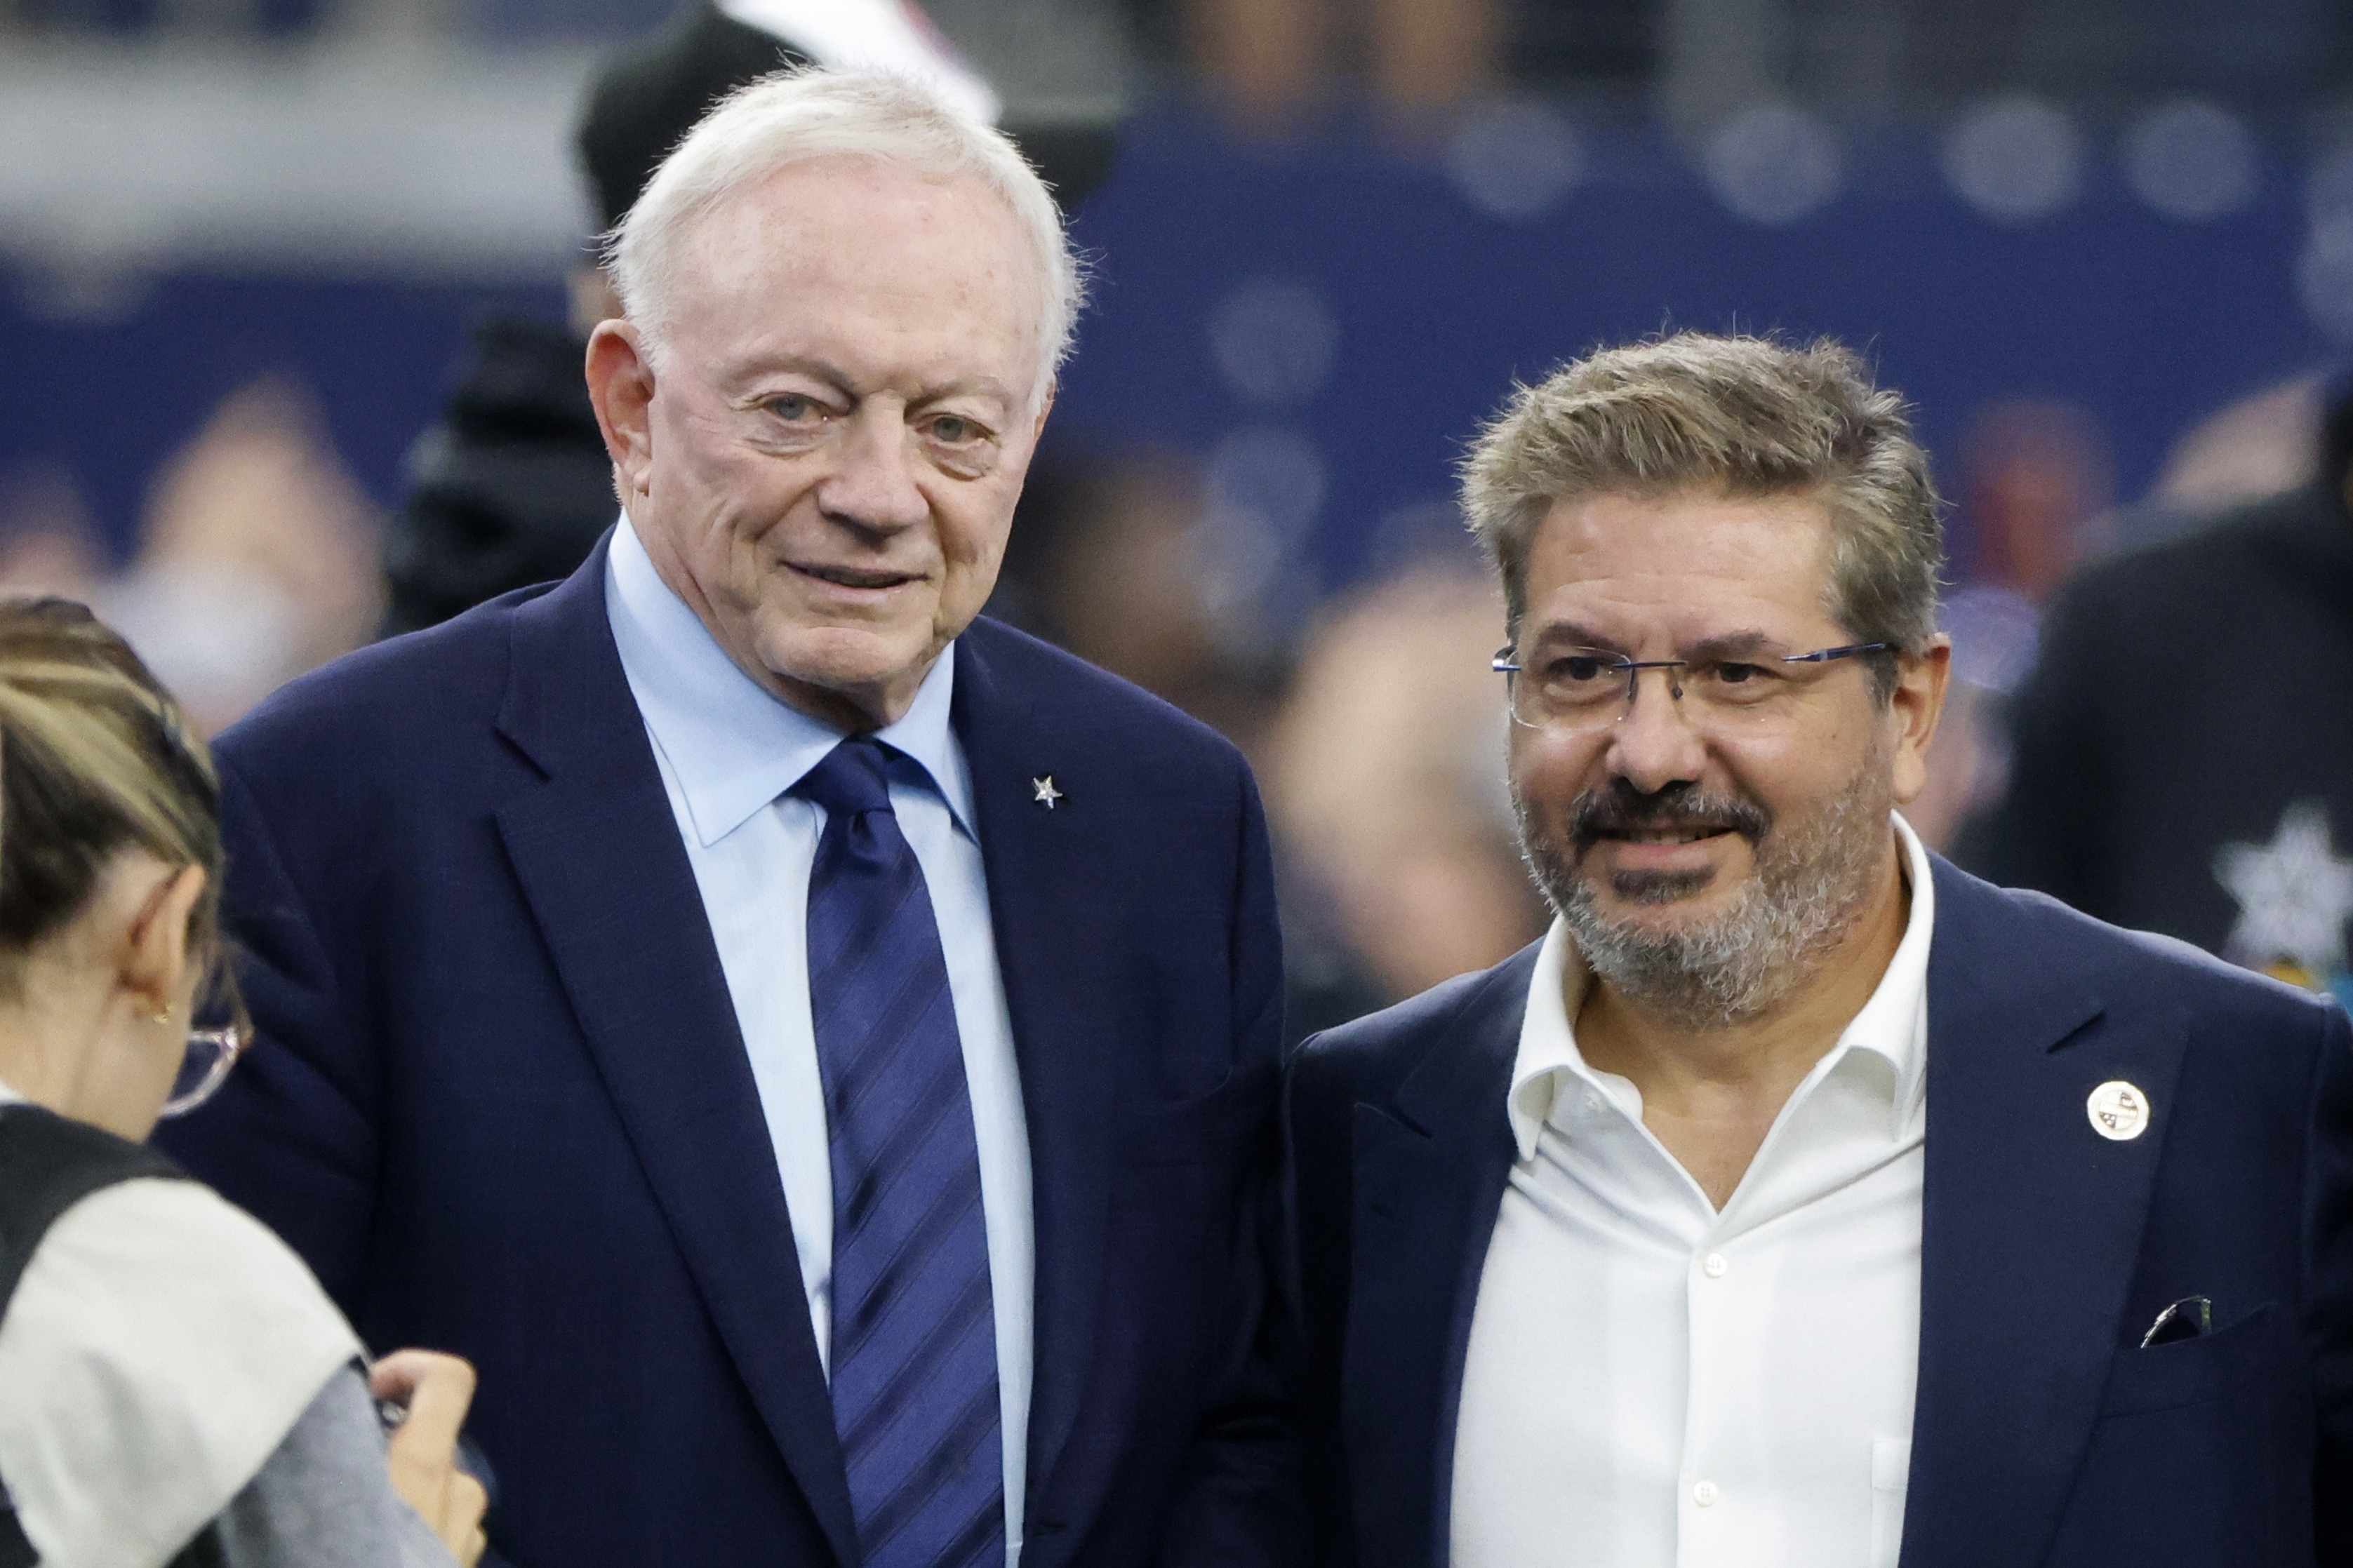 Dan Snyder 'has dirt' on Jerry Jones, hired PI to track NFL owners, per  report